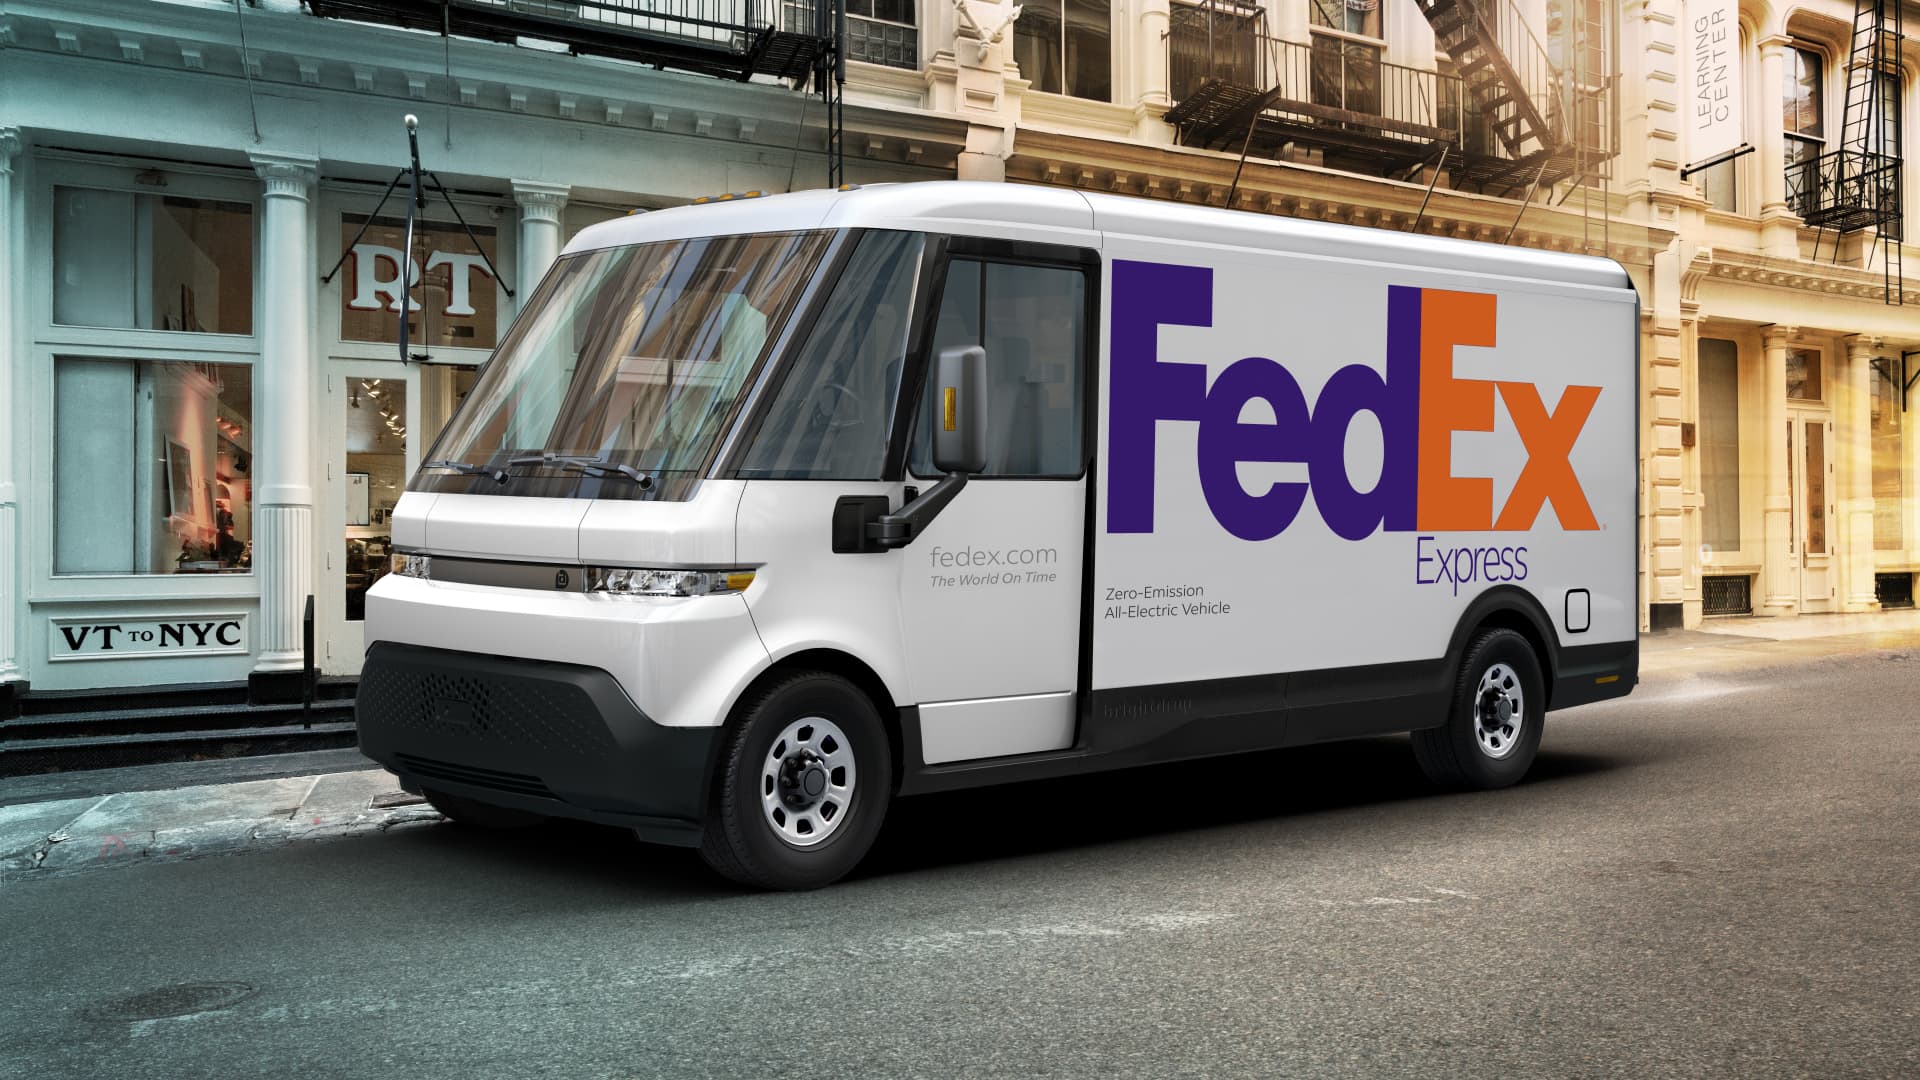 Stocks making big moves midday: FedEx, Continental Resources, Oracle